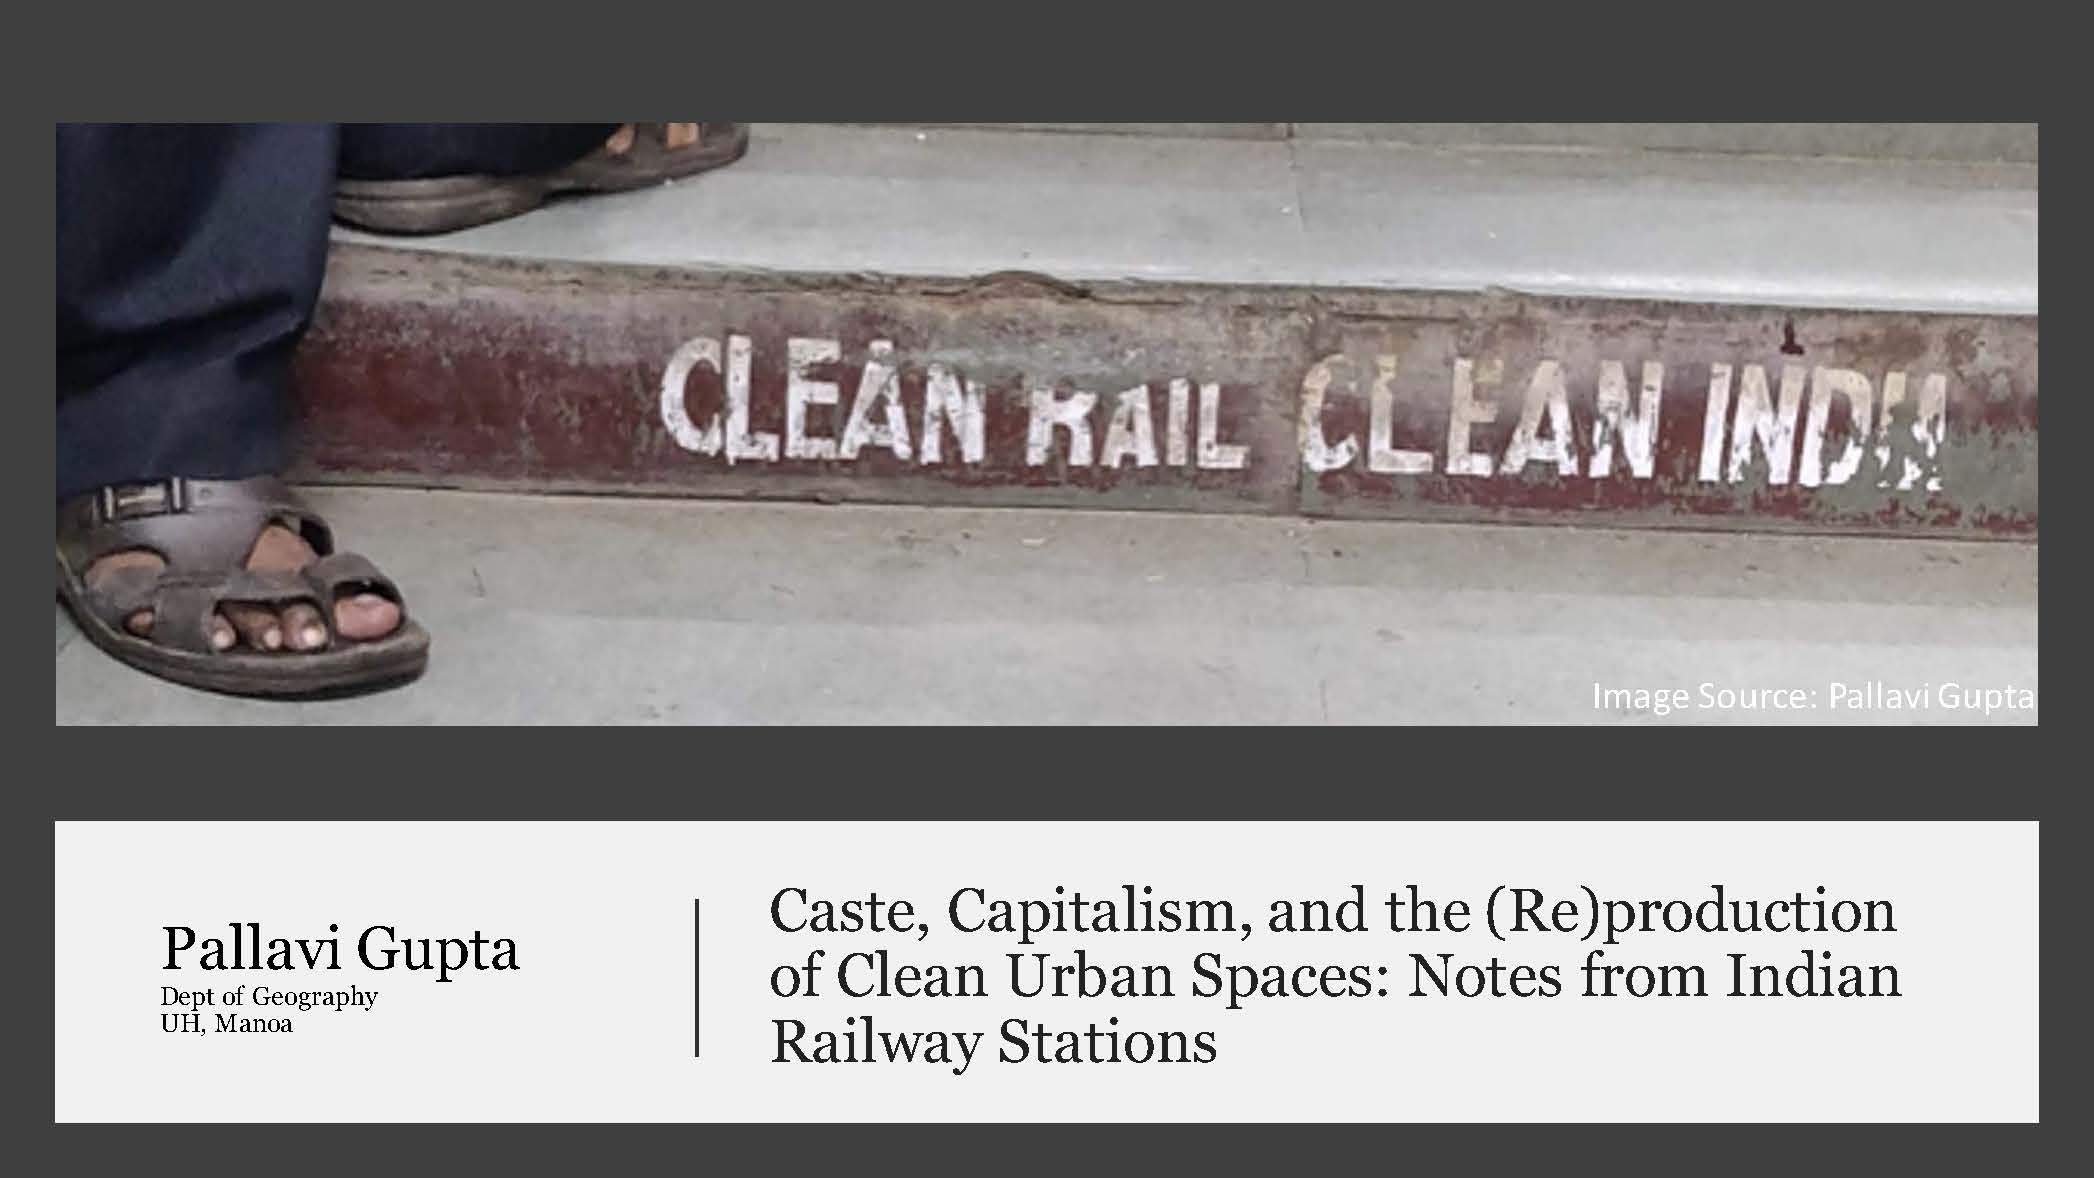 Picture of stairs with "Clean Rail Clean India" on them